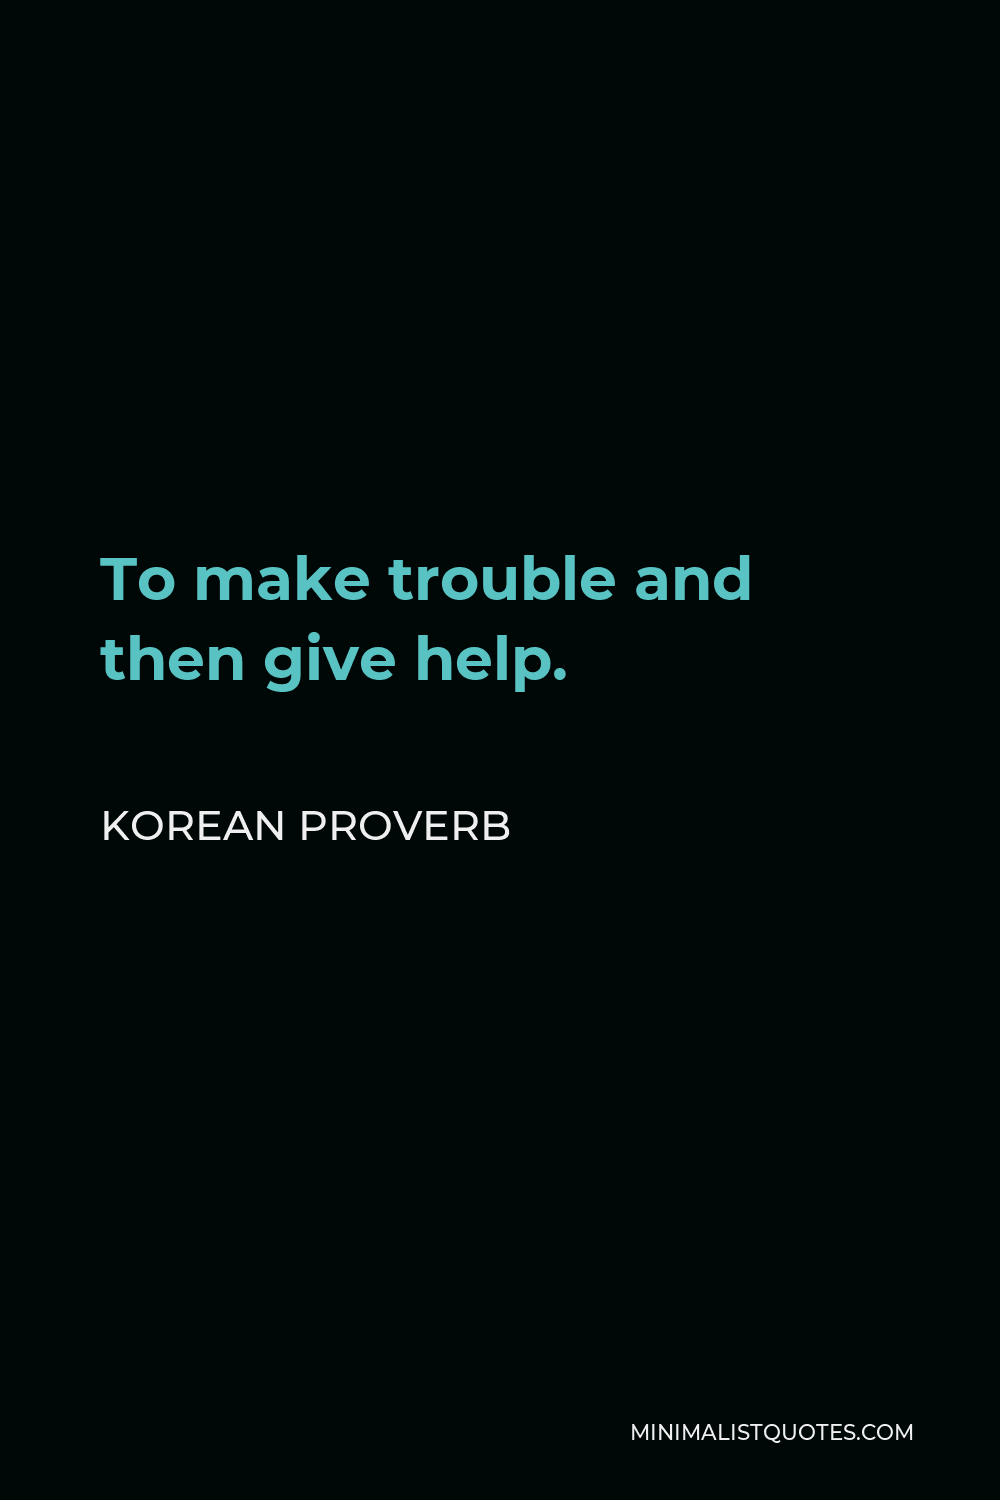 Korean Proverb Quote - To make trouble and then give help.